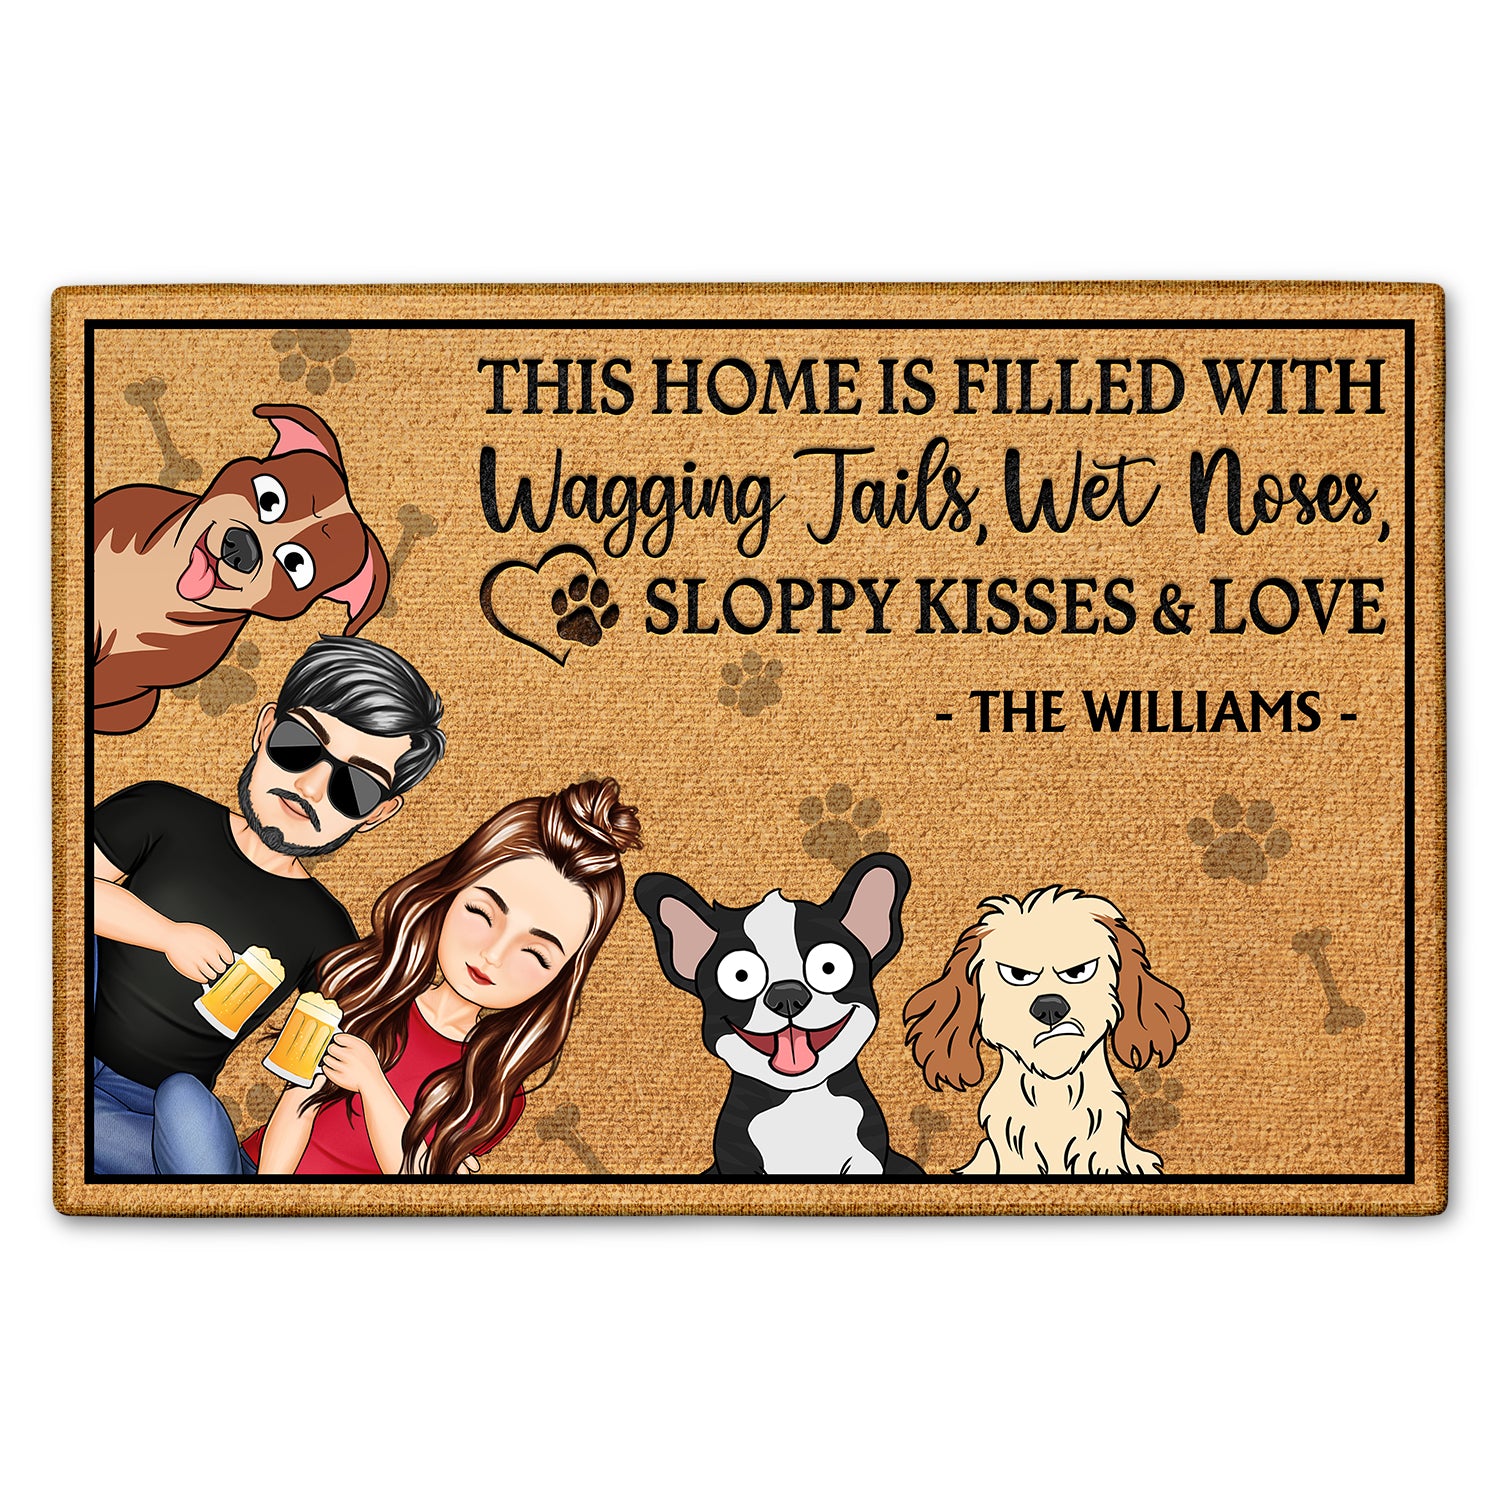 This Home Is Filled With Wagging Tails - Home Decor For Family, Couples, Single, Dog Lovers - Personalized Doormat